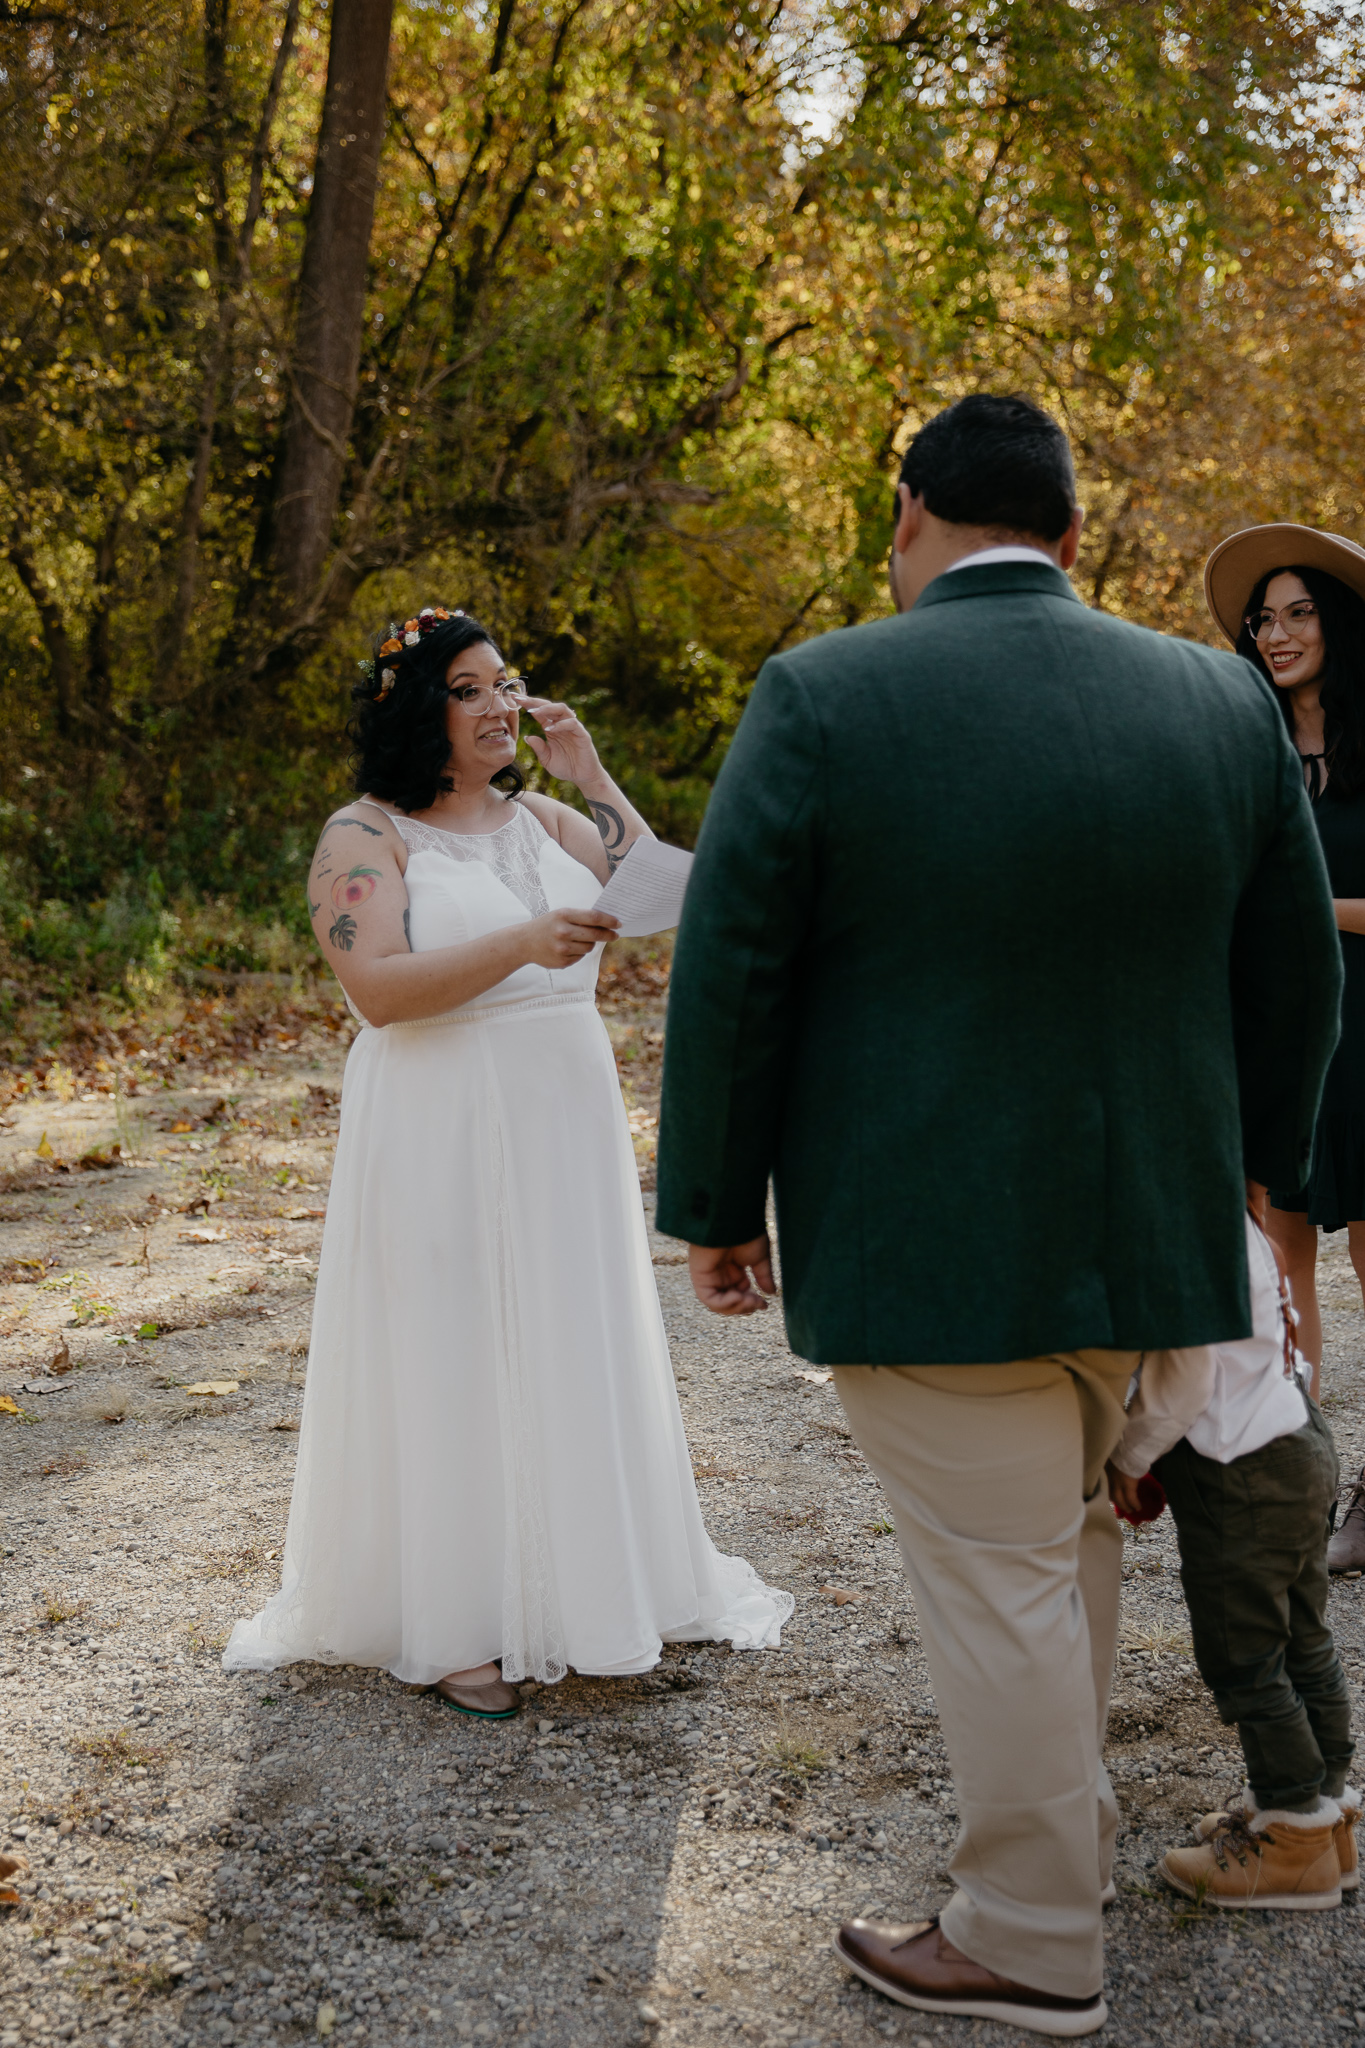 Bride reads vows at their Indiana Elopement at Turkey Run State Park